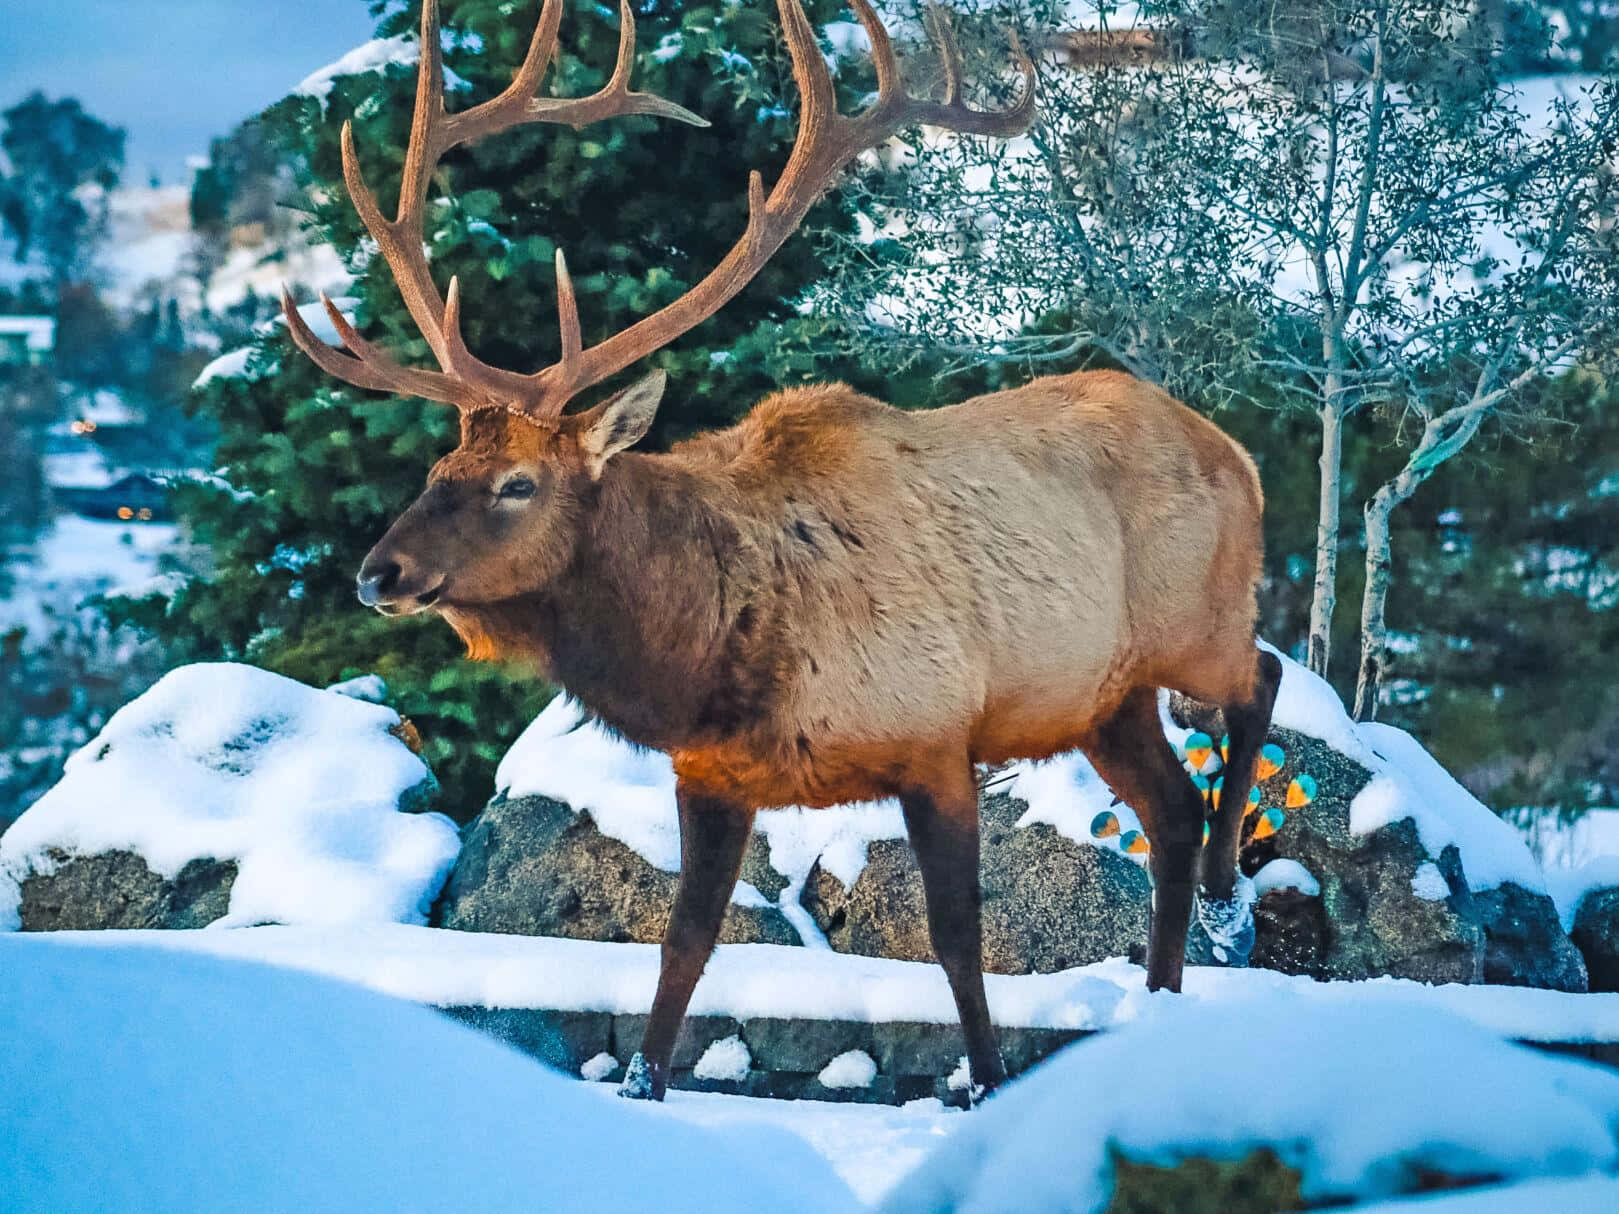 A majestic elk stands guard over a forest